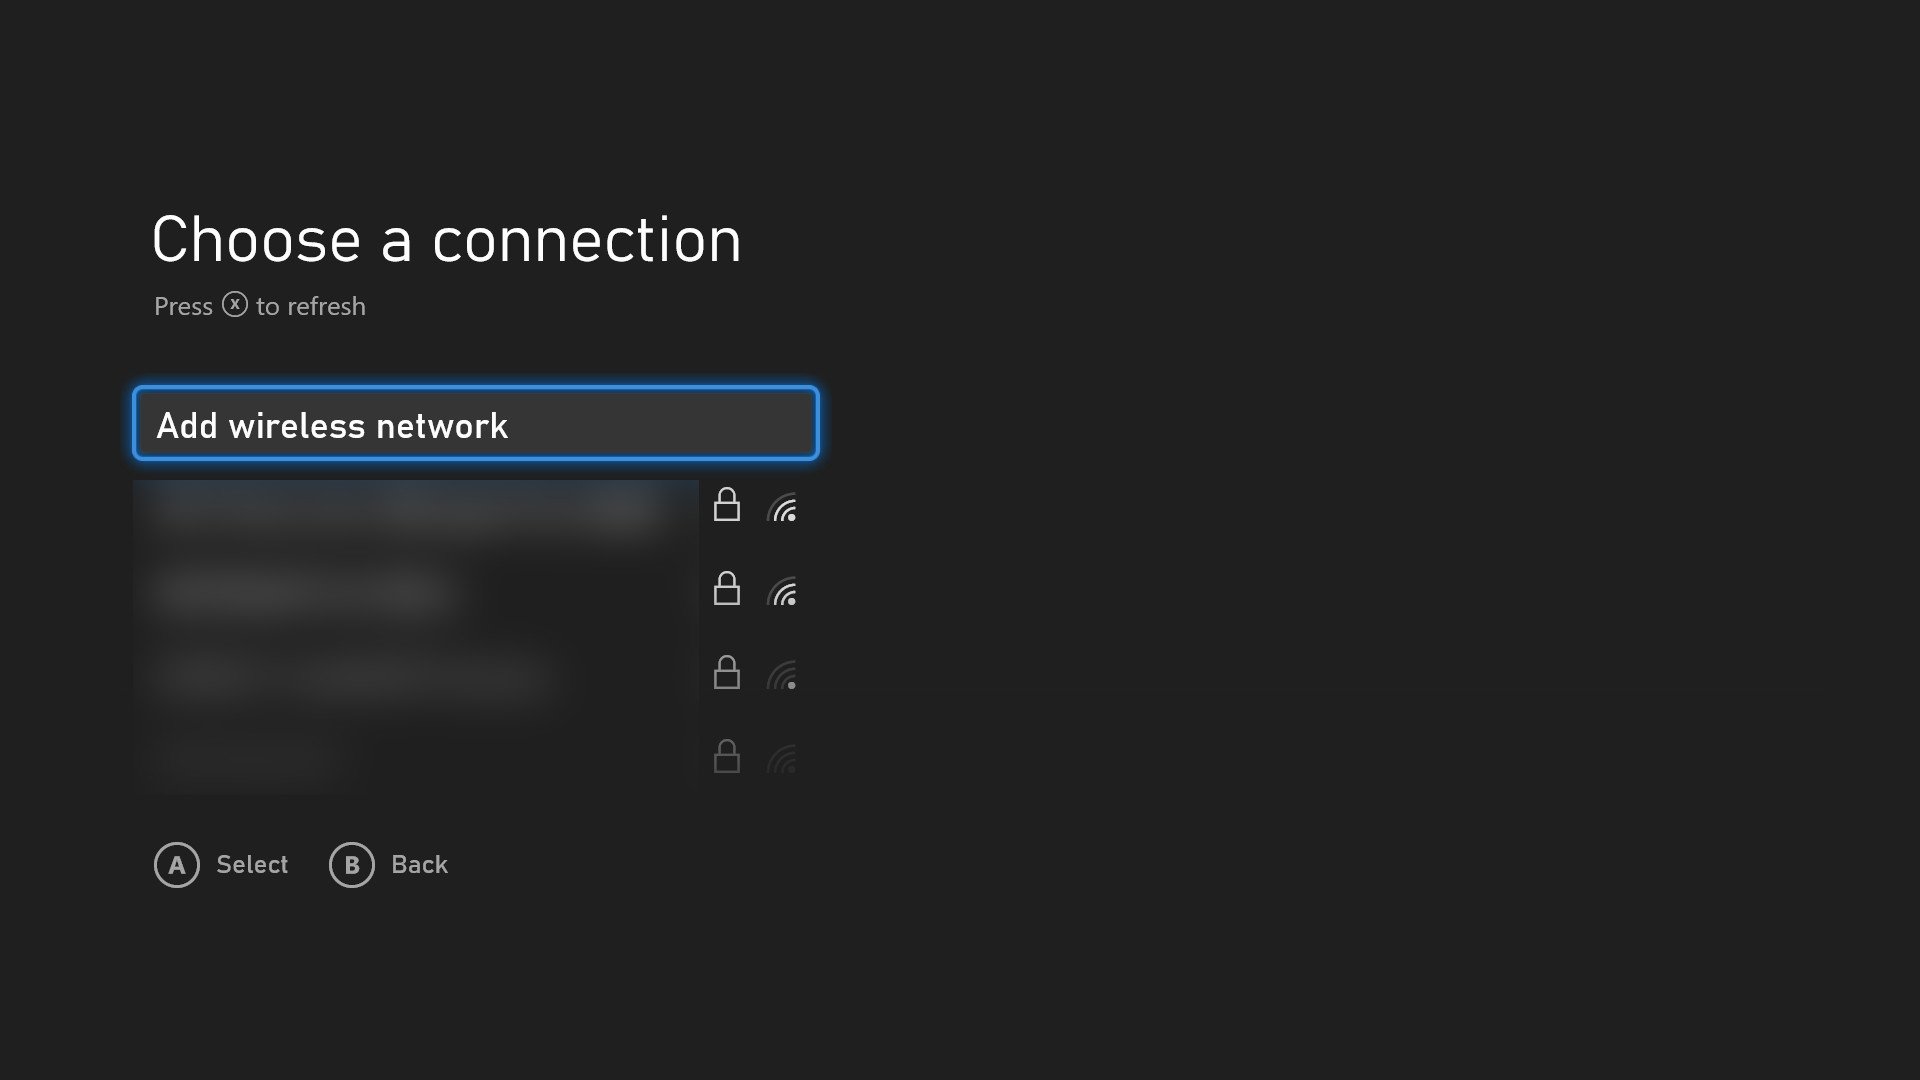 Xbox Series X|S Networking Guide